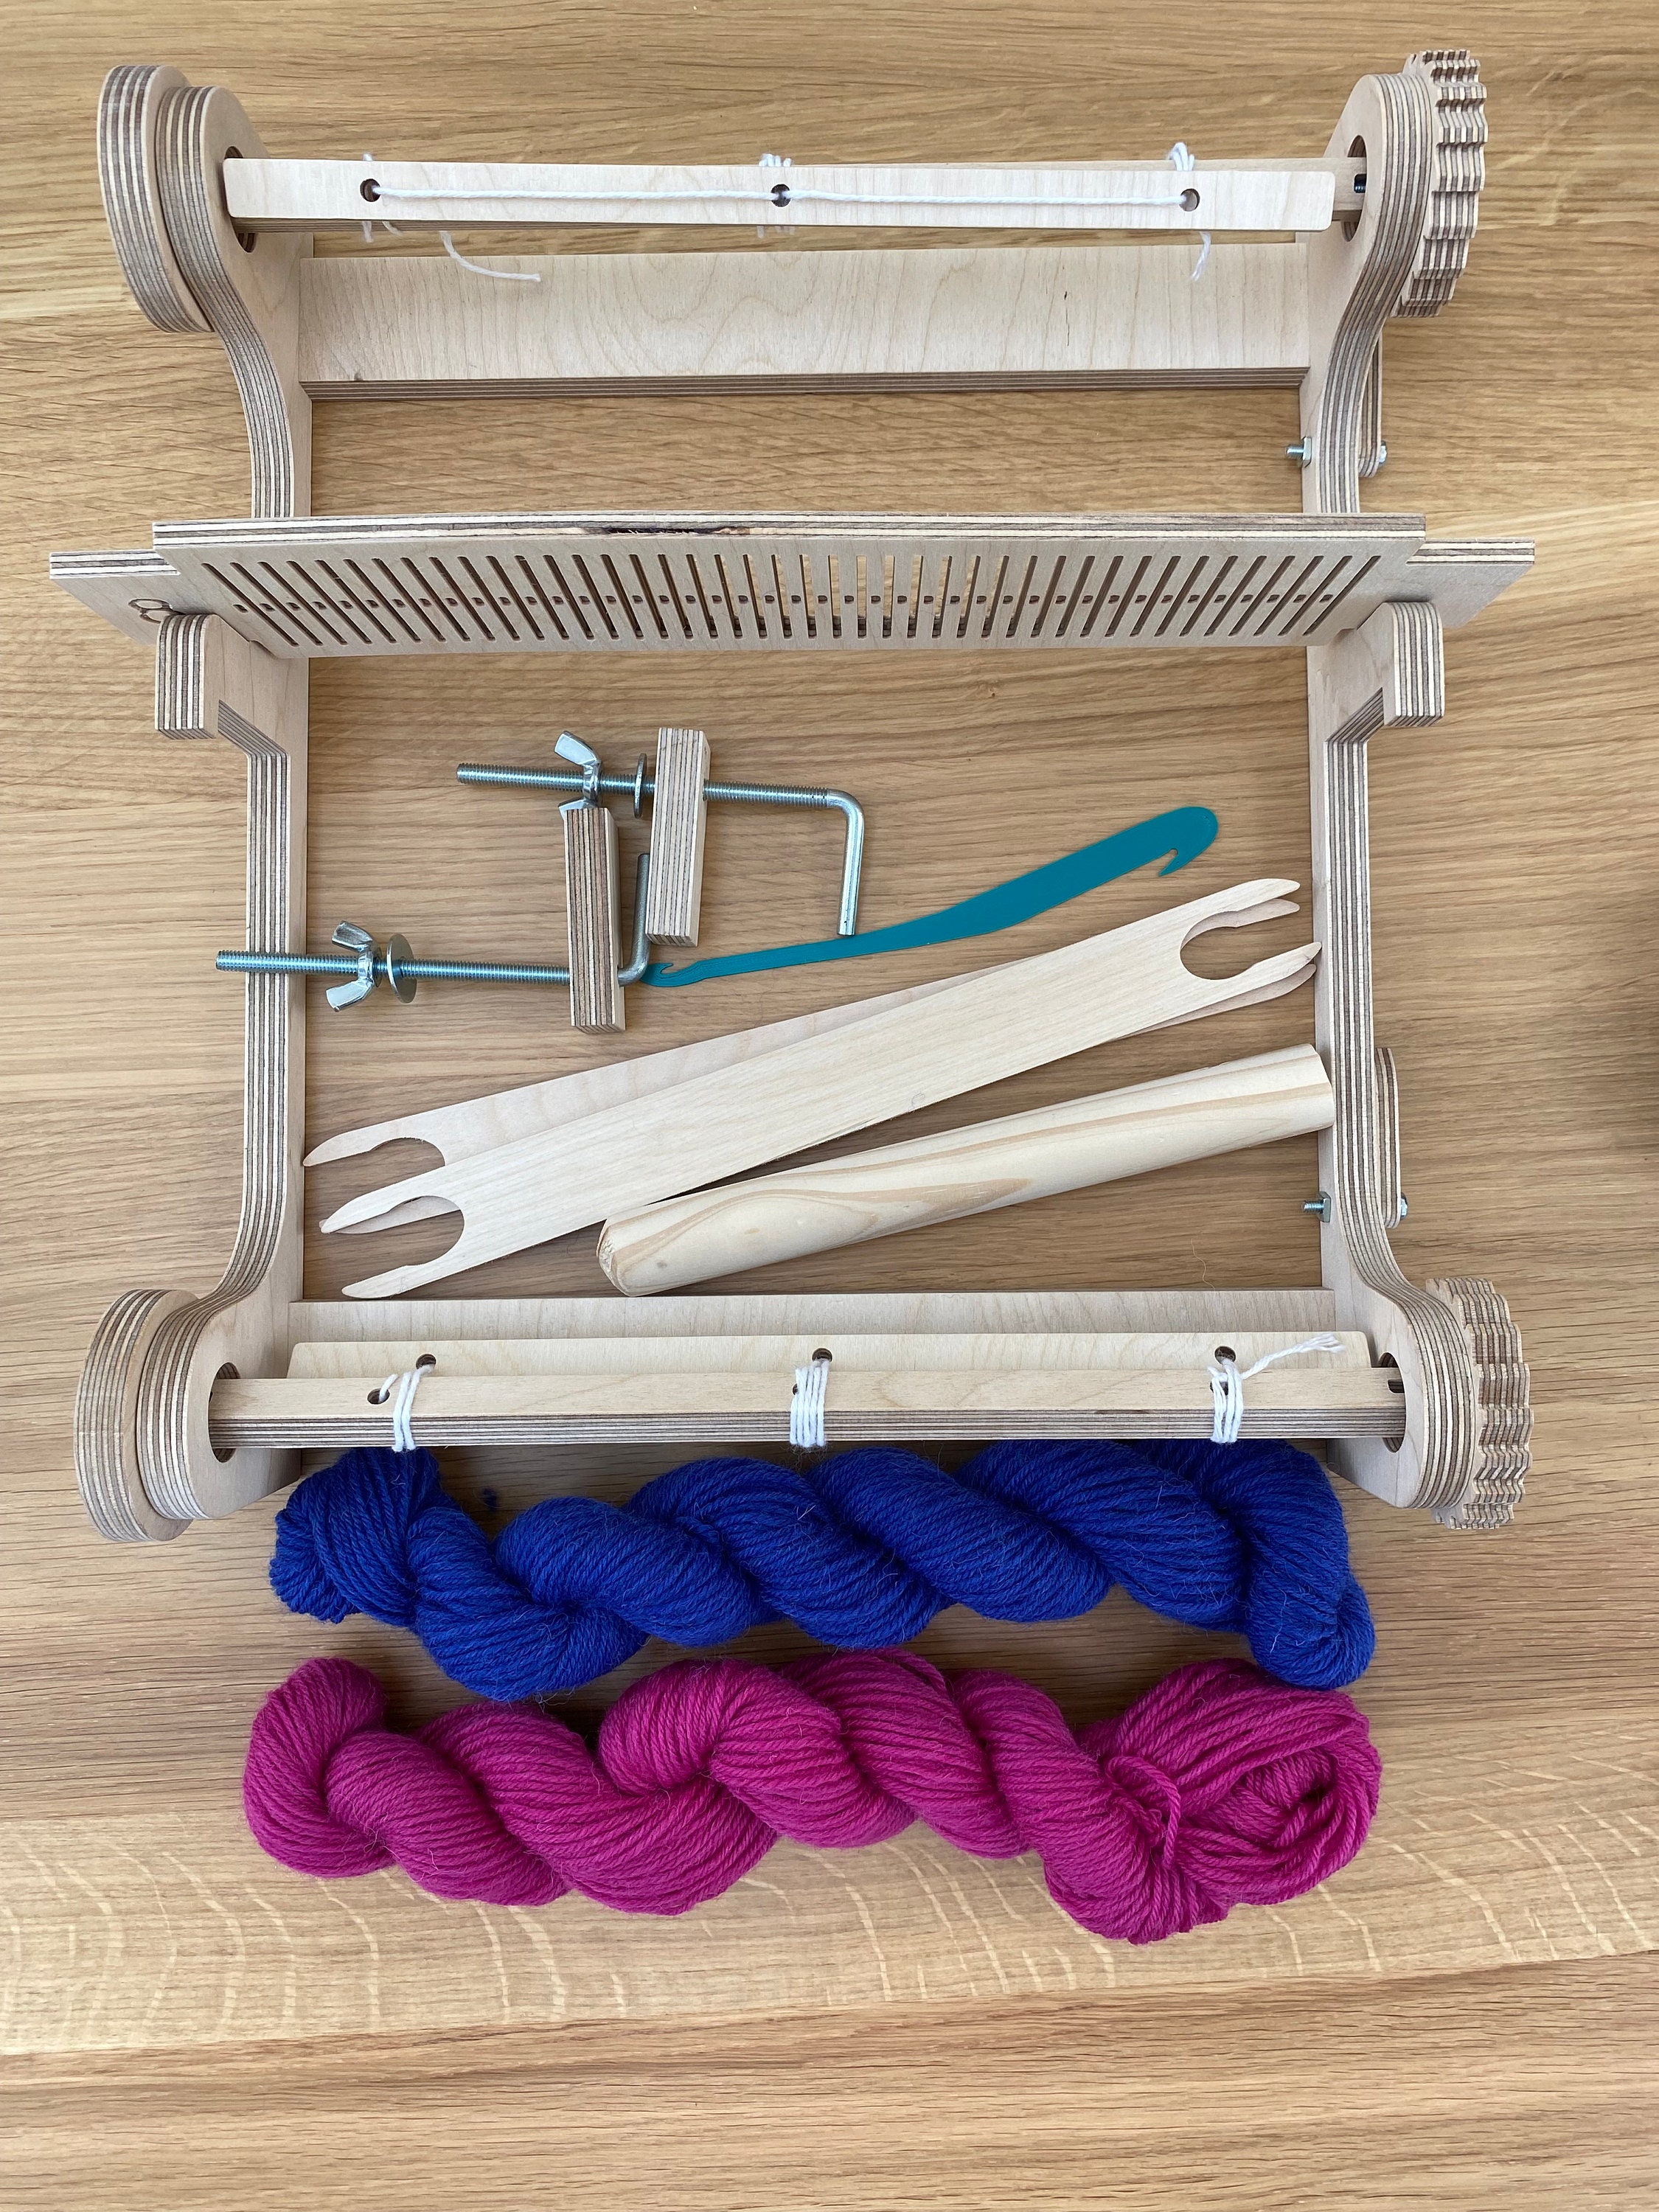 Rigid Heddle Loom, Cowl Weaving Kit, Learn to Weave With This Loom,  Accessories, Yarn and Instructions Create a Beautiful Wool Snood Scarf 